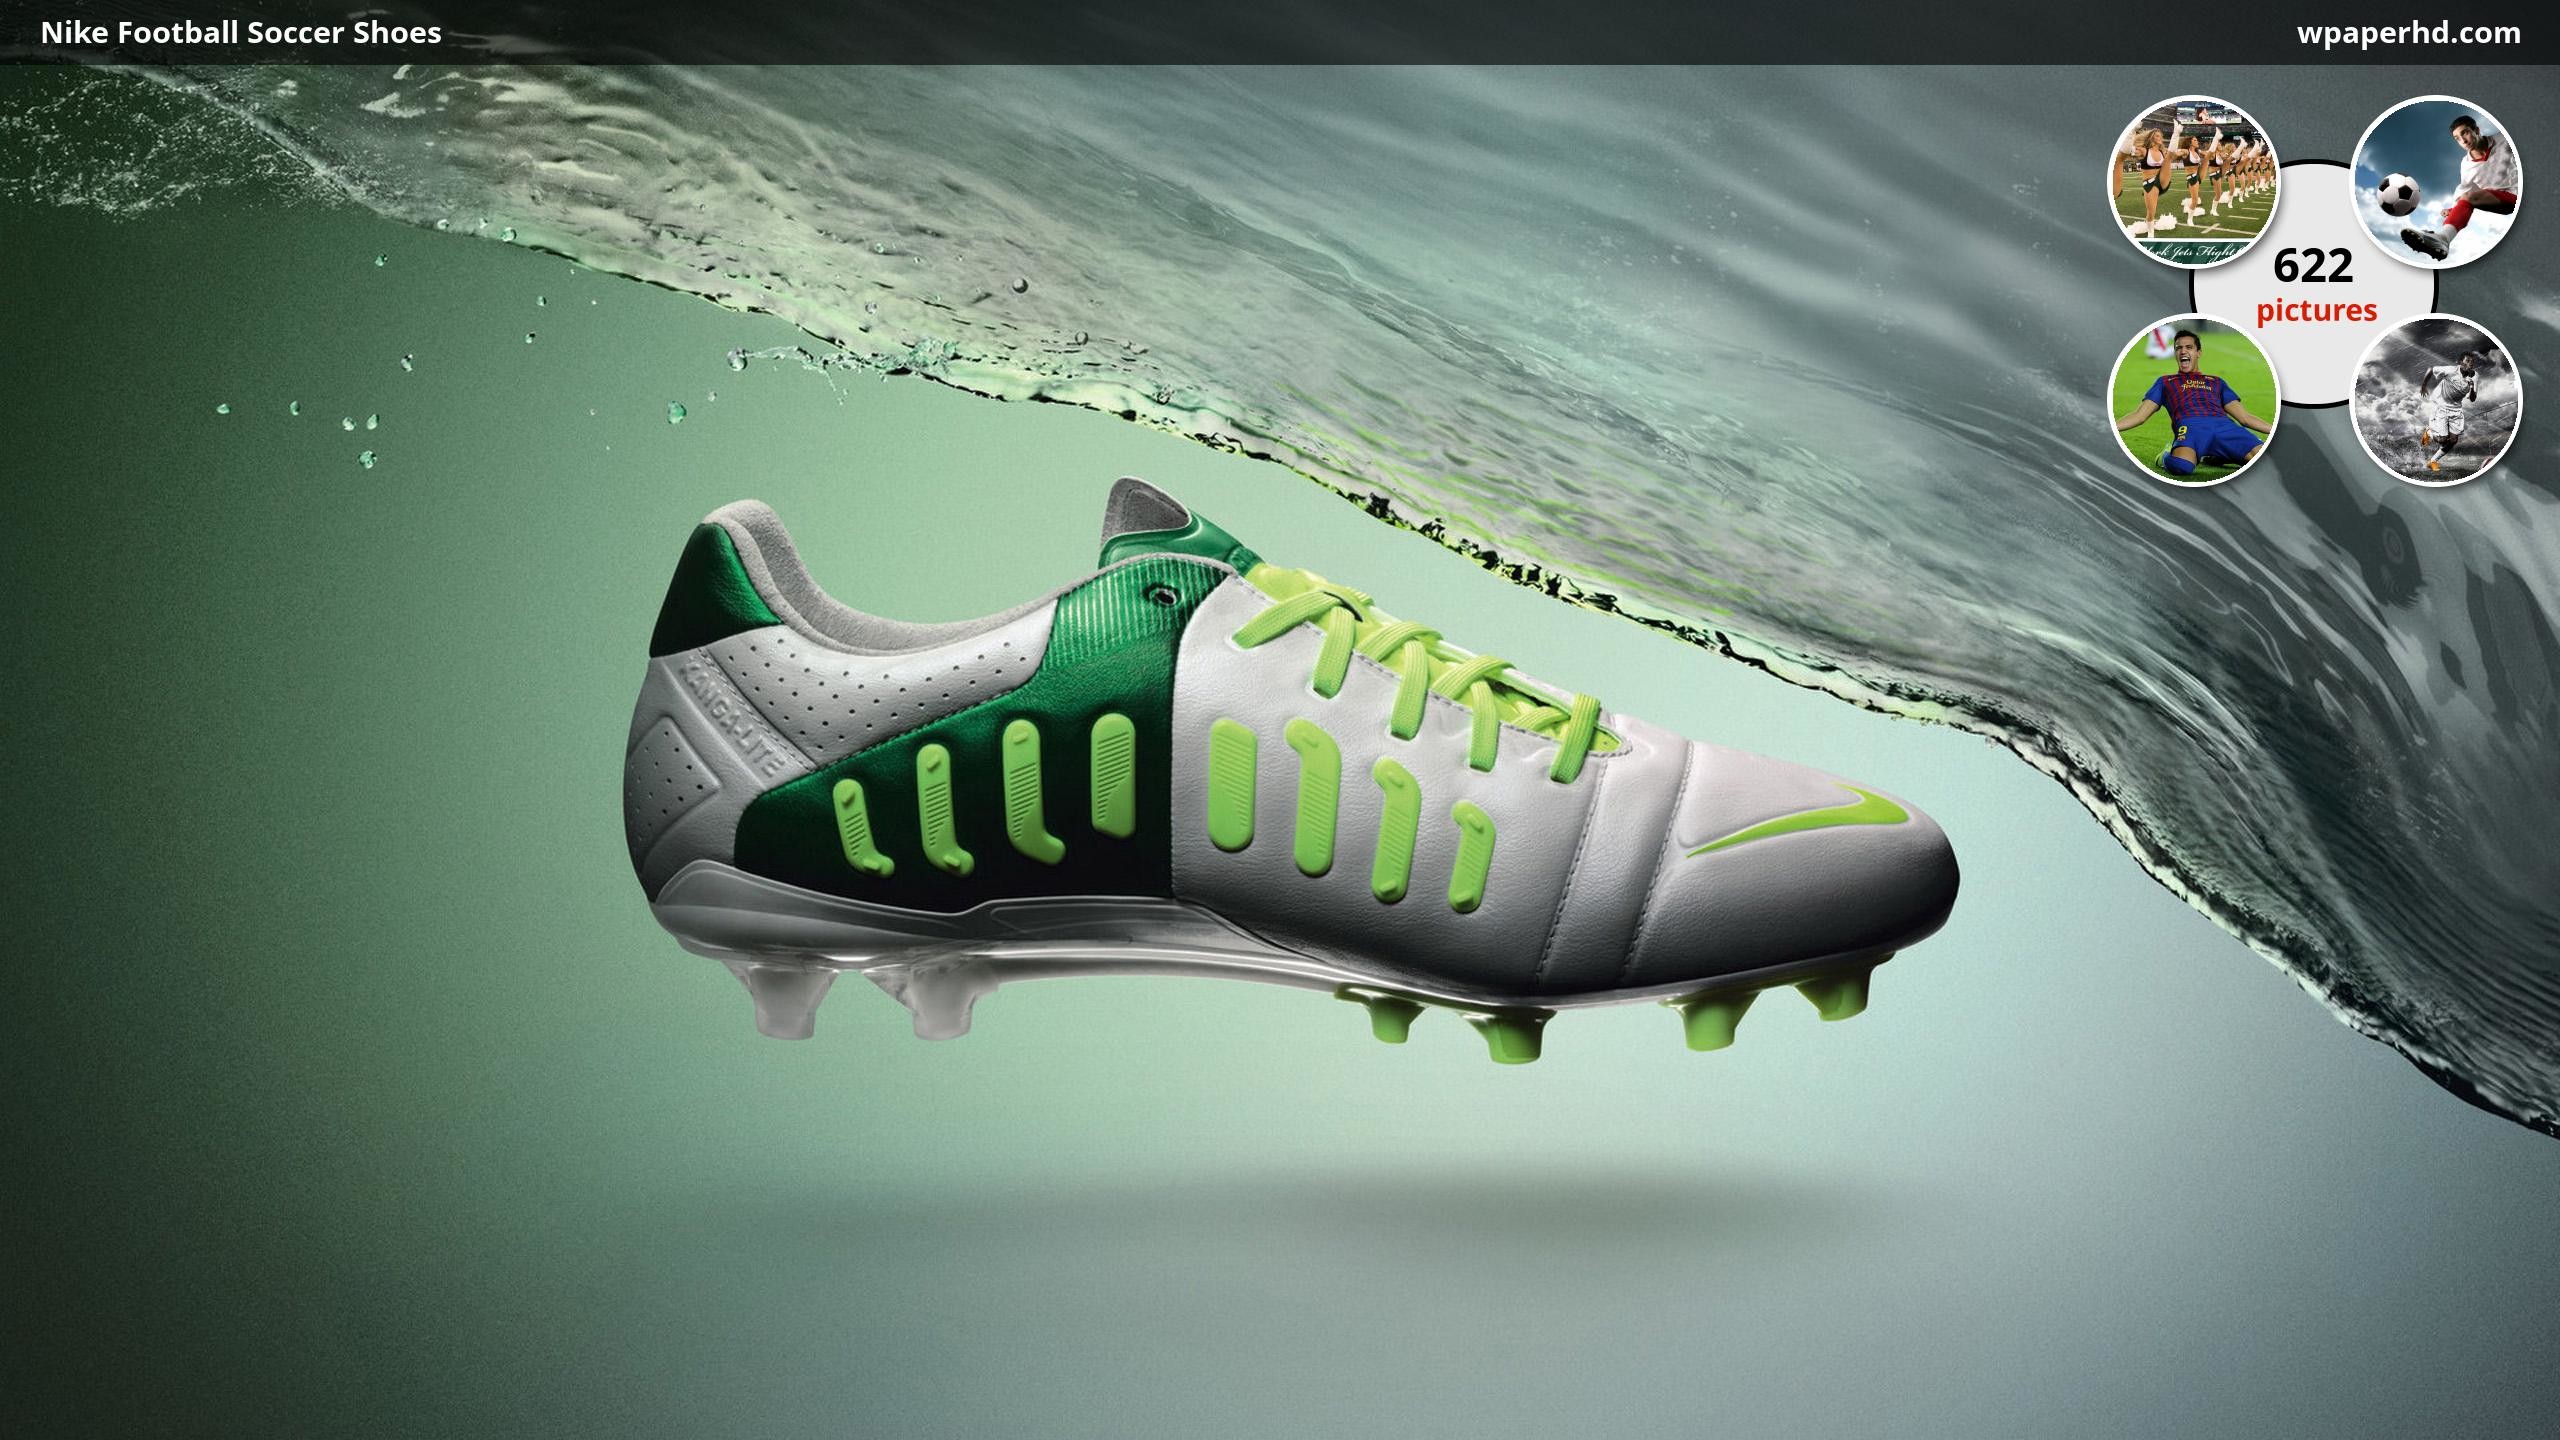 2560x1440 Description Nike Football Soccer Shoes wallpaper from Soccer category. You  are on page with Nike Football Soccer Shoes wallpaper ...